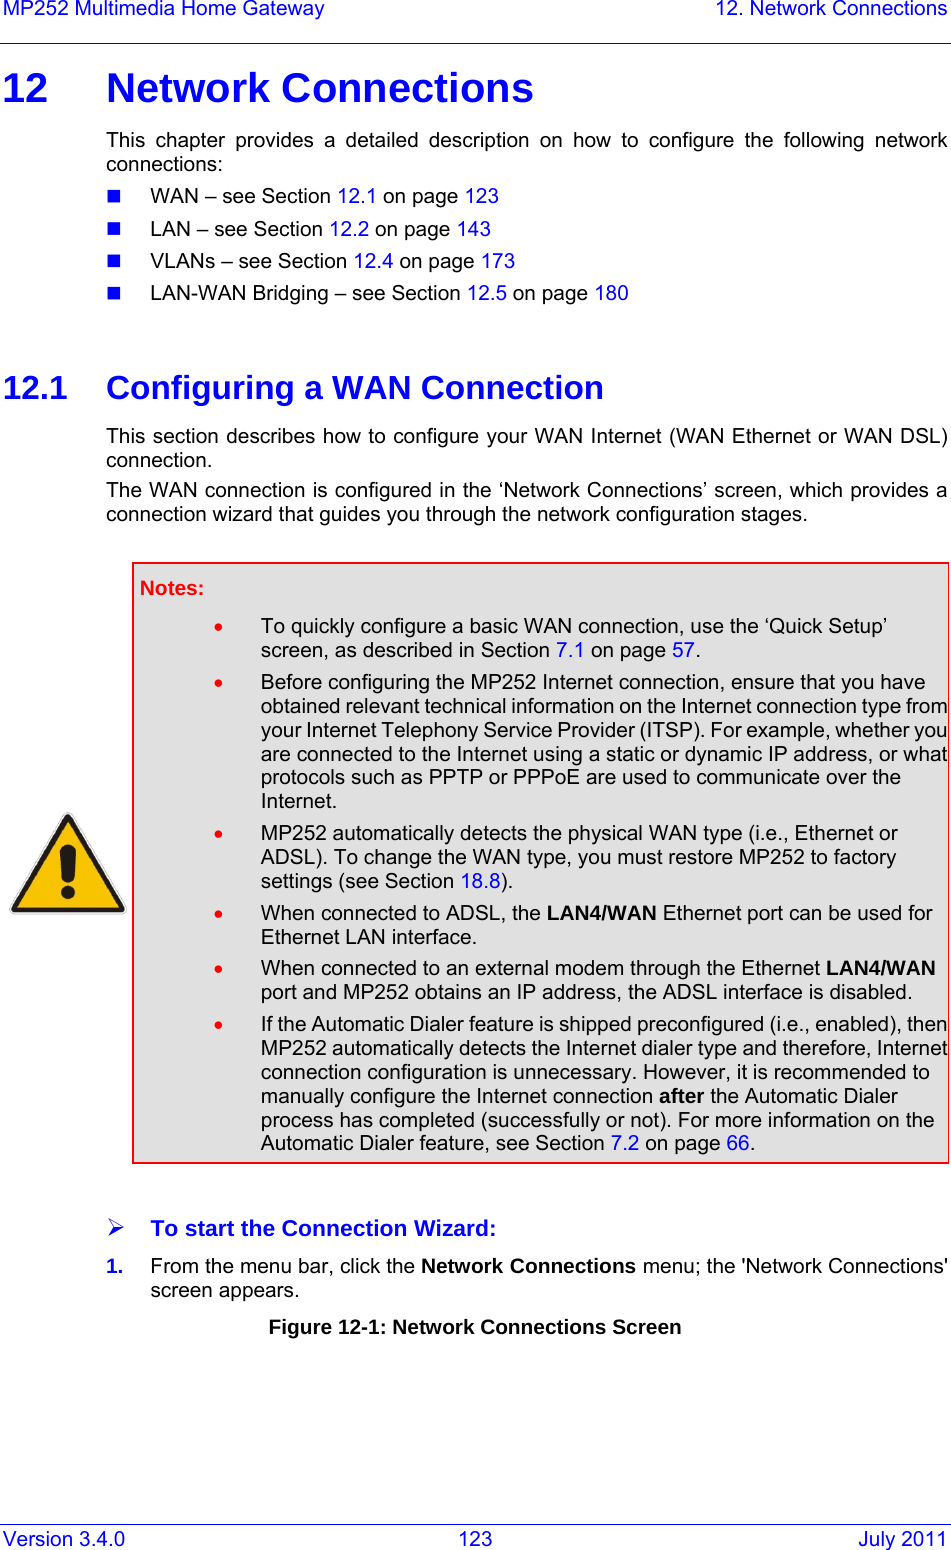 Version 3.4.0  123  July 2011 MP252 Multimedia Home Gateway  12. Network Connections 12 Network Connections This chapter provides a detailed description on how to configure the following network connections:  WAN – see Section 12.1 on page 123  LAN – see Section 12.2 on page 143  VLANs – see Section 12.4 on page 173  LAN-WAN Bridging – see Section 12.5 on page 180  12.1  Configuring a WAN Connection This section describes how to configure your WAN Internet (WAN Ethernet or WAN DSL) connection.  The WAN connection is configured in the ‘Network Connections’ screen, which provides a connection wizard that guides you through the network configuration stages.   Notes:  • To quickly configure a basic WAN connection, use the ‘Quick Setup’ screen, as described in Section 7.1 on page 57. • Before configuring the MP252 Internet connection, ensure that you have obtained relevant technical information on the Internet connection type from your Internet Telephony Service Provider (ITSP). For example, whether you are connected to the Internet using a static or dynamic IP address, or what protocols such as PPTP or PPPoE are used to communicate over the Internet. • MP252 automatically detects the physical WAN type (i.e., Ethernet or ADSL). To change the WAN type, you must restore MP252 to factory settings (see Section 18.8). • When connected to ADSL, the LAN4/WAN Ethernet port can be used for Ethernet LAN interface.  • When connected to an external modem through the Ethernet LAN4/WAN port and MP252 obtains an IP address, the ADSL interface is disabled. • If the Automatic Dialer feature is shipped preconfigured (i.e., enabled), then MP252 automatically detects the Internet dialer type and therefore, Internet connection configuration is unnecessary. However, it is recommended to manually configure the Internet connection after the Automatic Dialer process has completed (successfully or not). For more information on the Automatic Dialer feature, see Section 7.2 on page 66.  ¾ To start the Connection Wizard: 1.  From the menu bar, click the Network Connections menu; the &apos;Network Connections&apos; screen appears. Figure 12-1: Network Connections Screen 